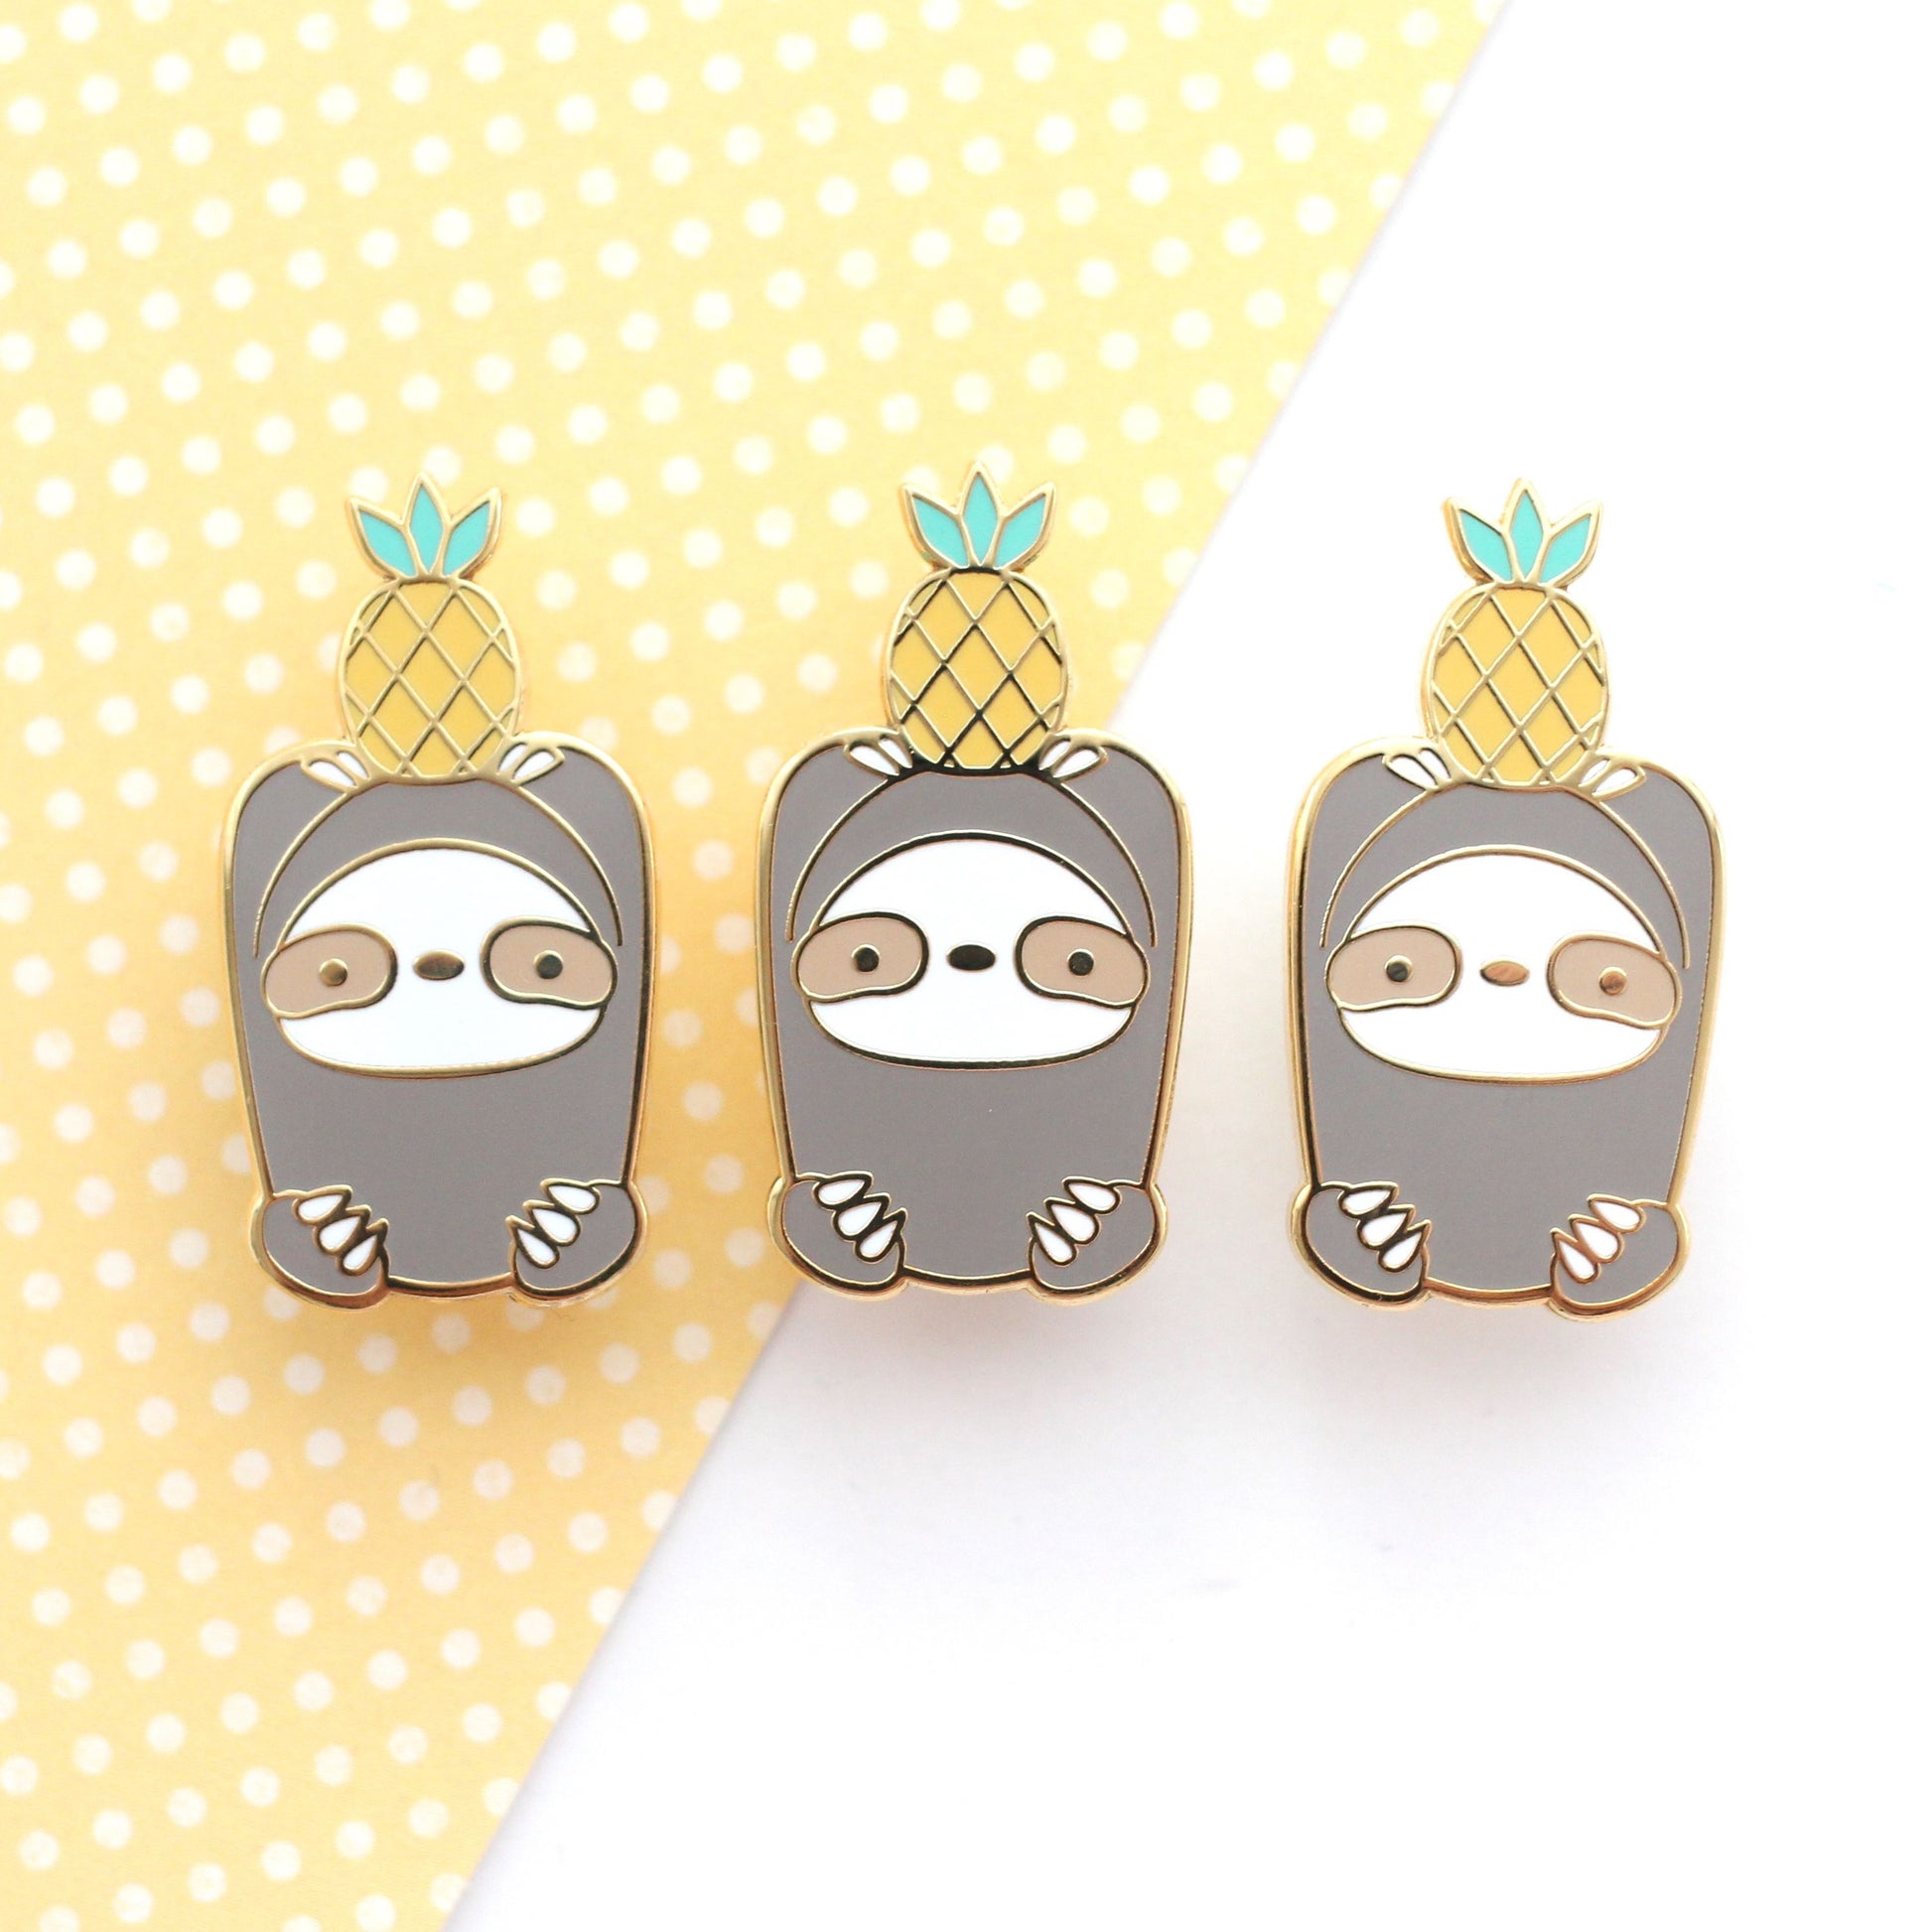 Pineapple Sloth Enamel Pin. Sloth Gift. Fruit Pin by Wild Whimsy Woolies